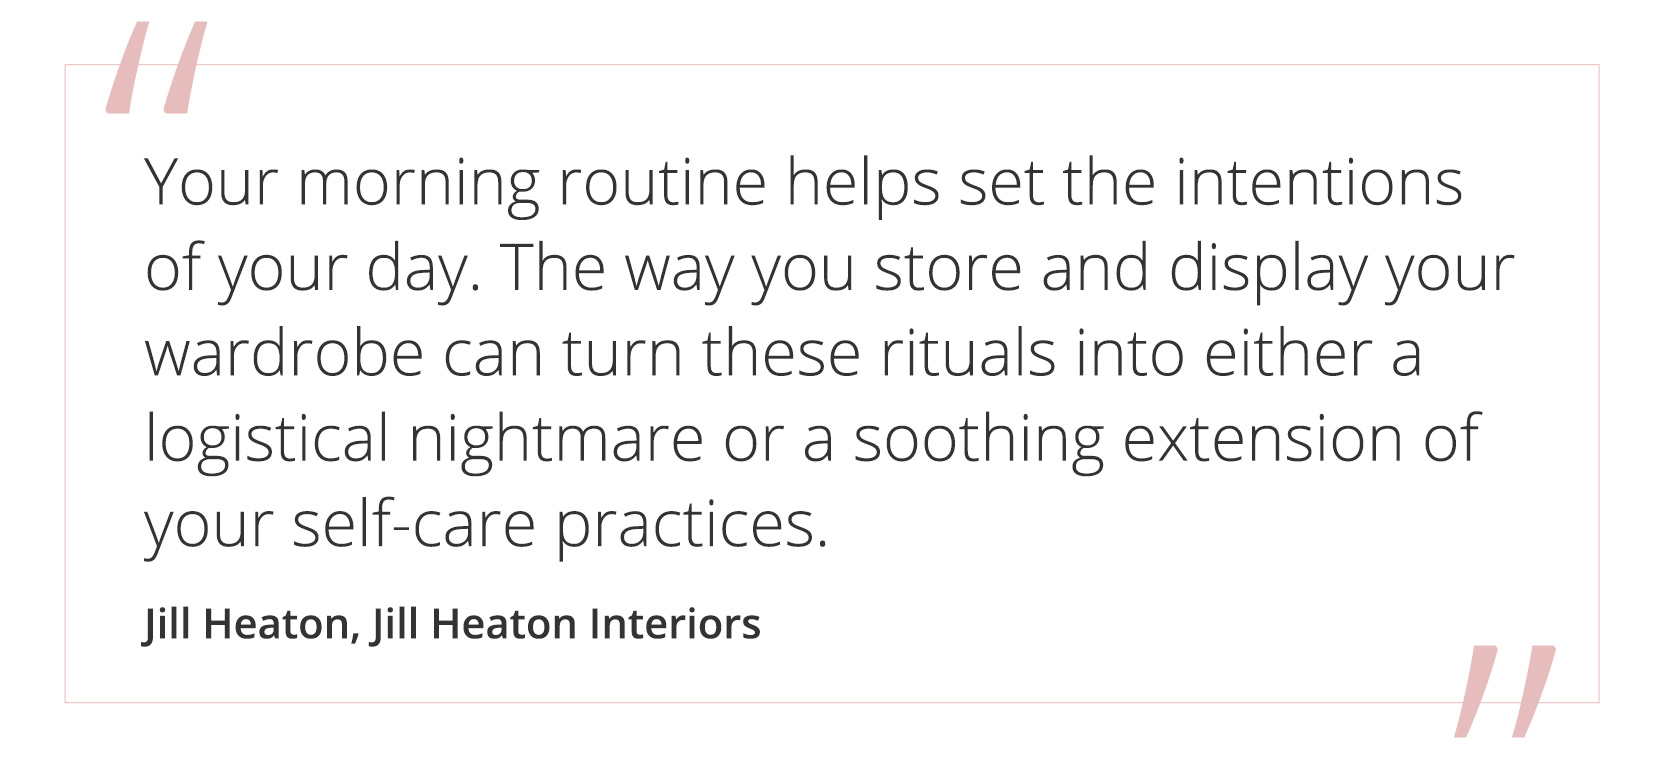 "Your morning routine helps set the intentions of your day. The way you store and display your wardrobe can turn these rituals into either a logistical nightmare or a soothing extension of your self-care practices." Jill heaton, Jill heaton interiors"